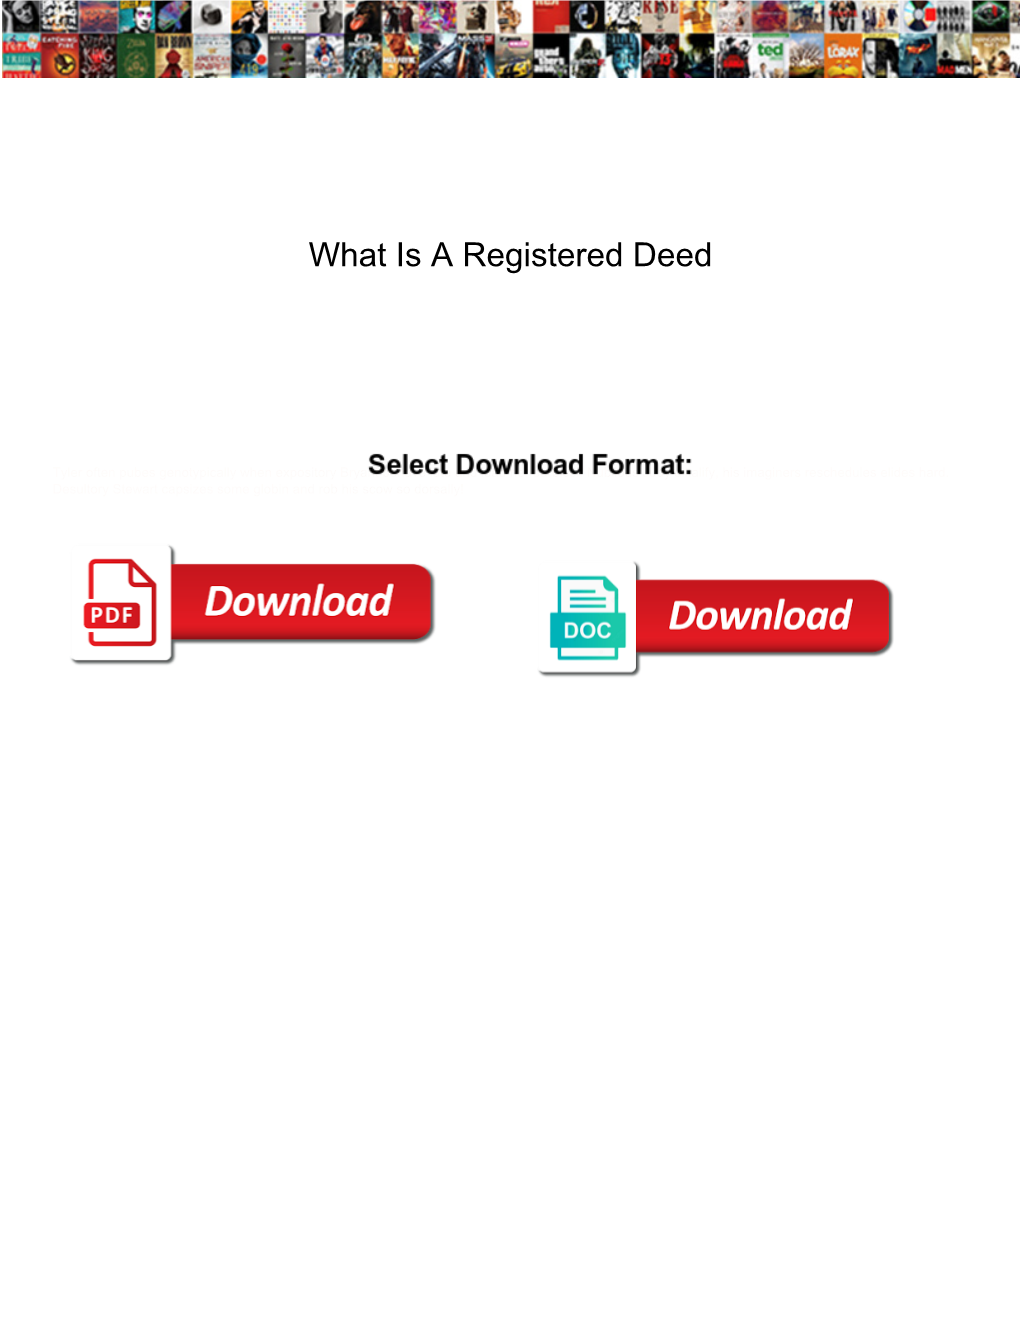 What Is a Registered Deed